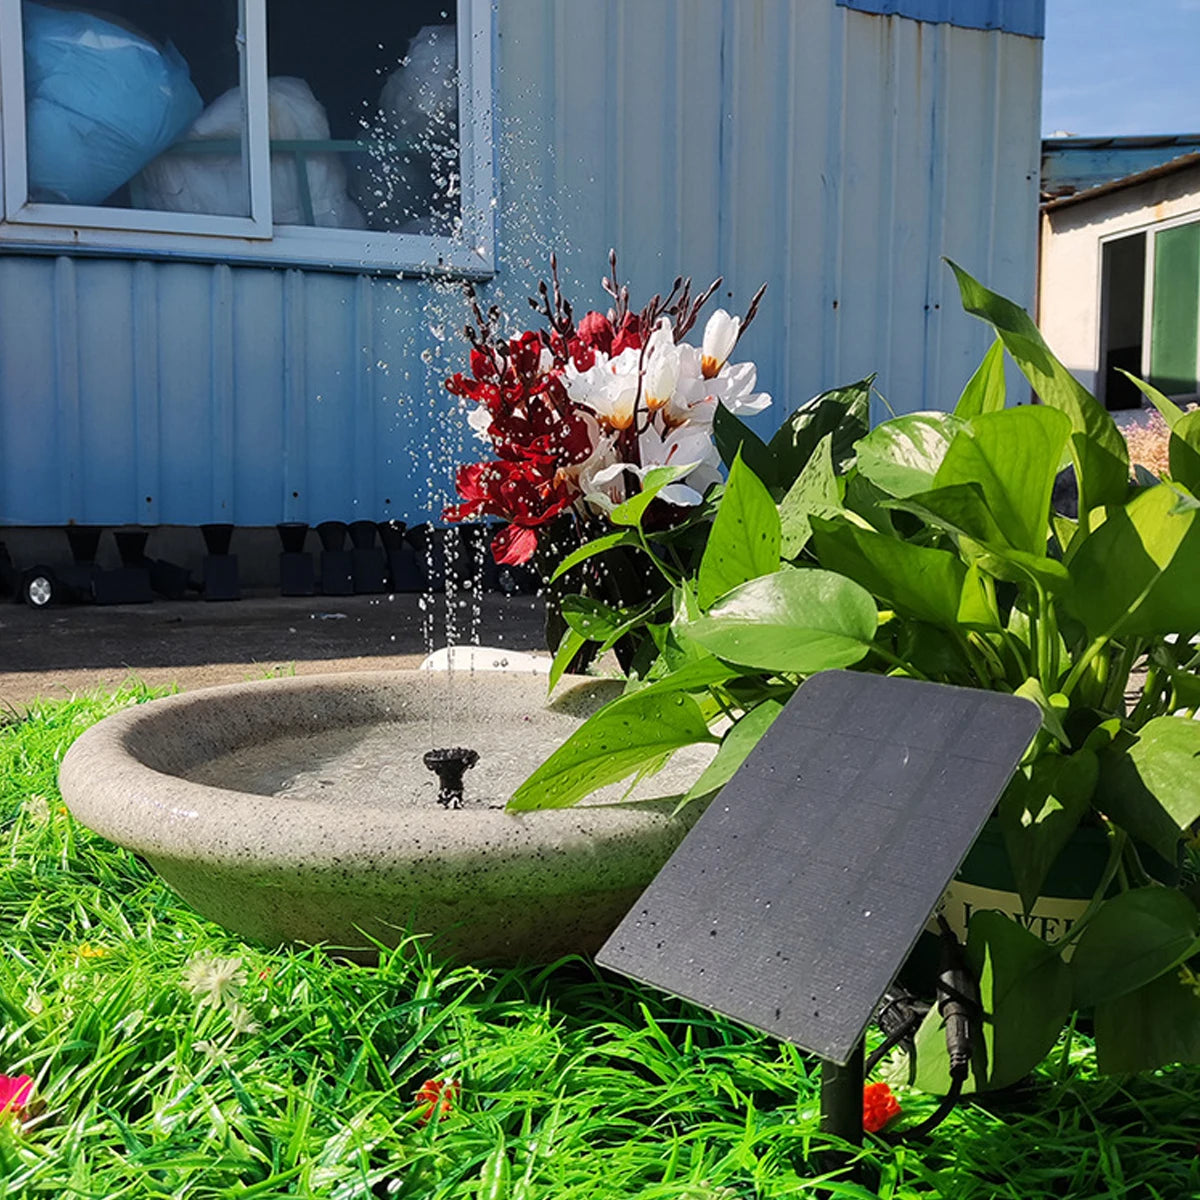 2.5W Solar Fountain, Solar-powered fountain requires direct sunlight for operation.